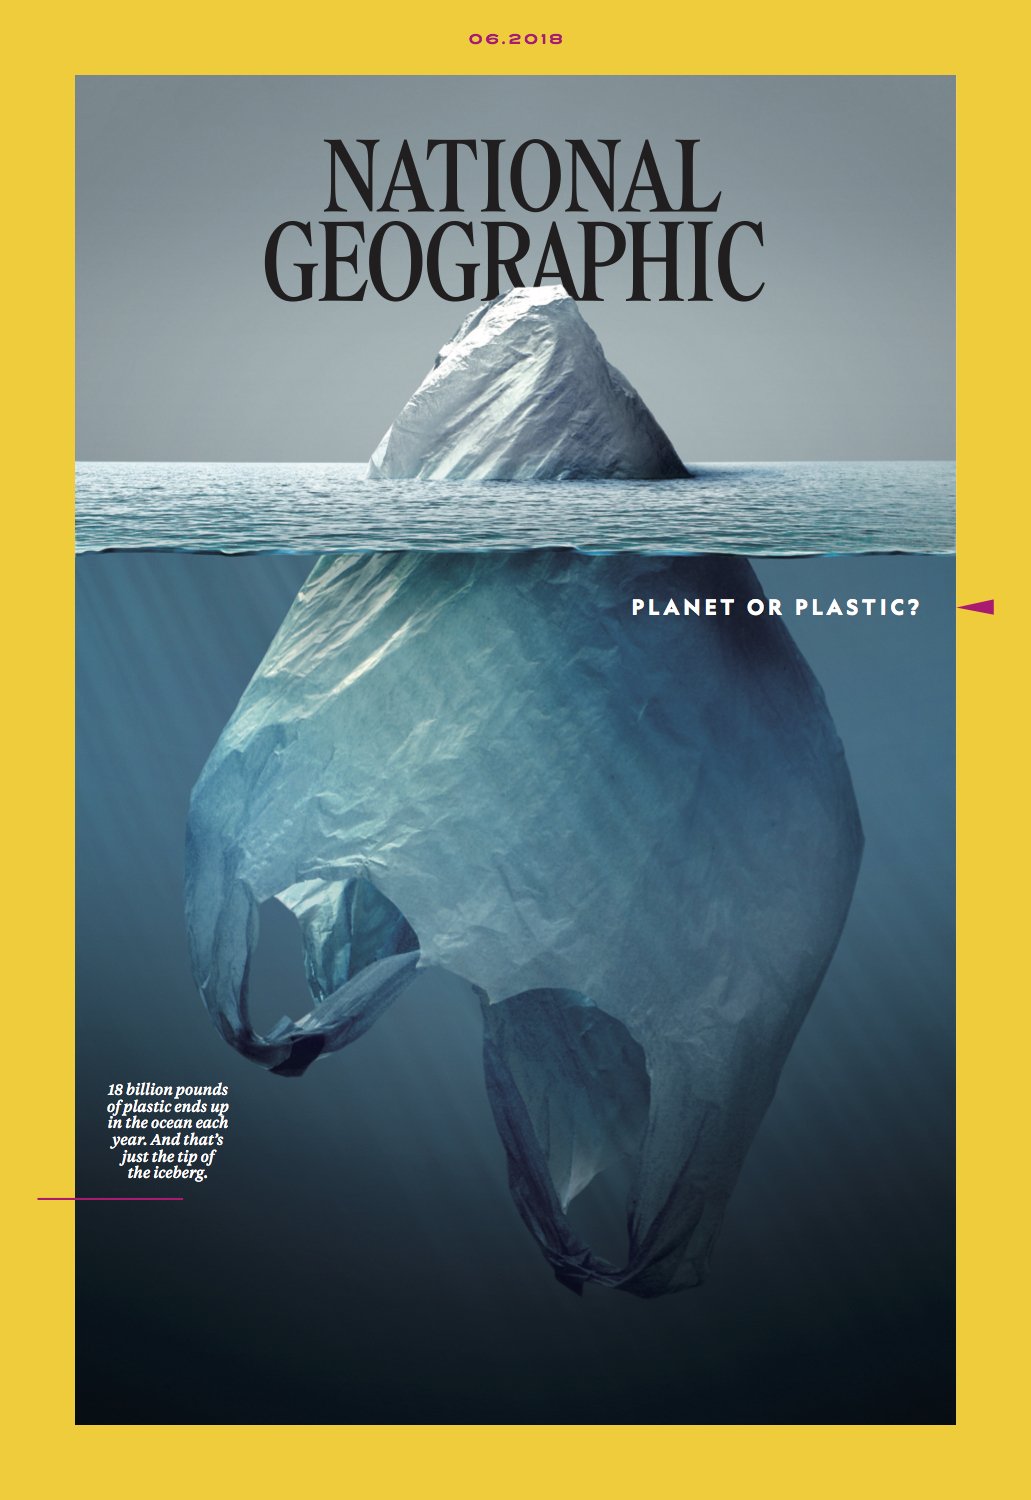 National Geographic, Planet or Plastic series